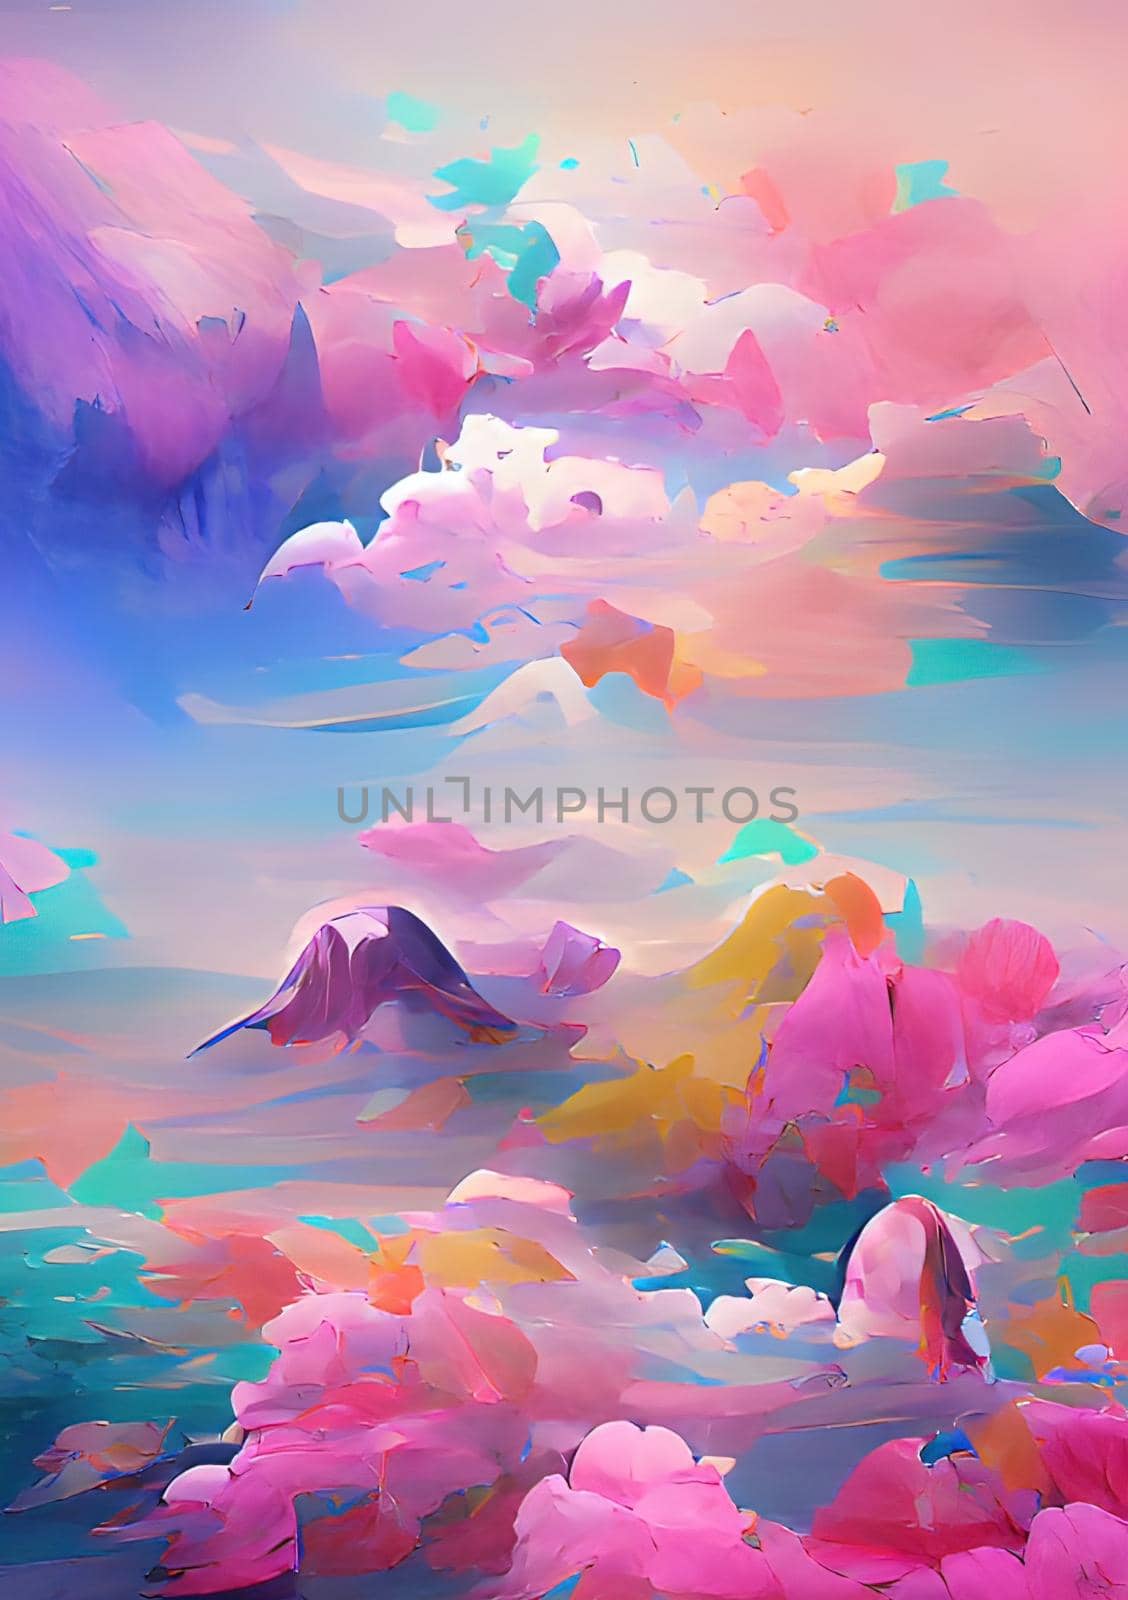 abstract colorful background with clouds